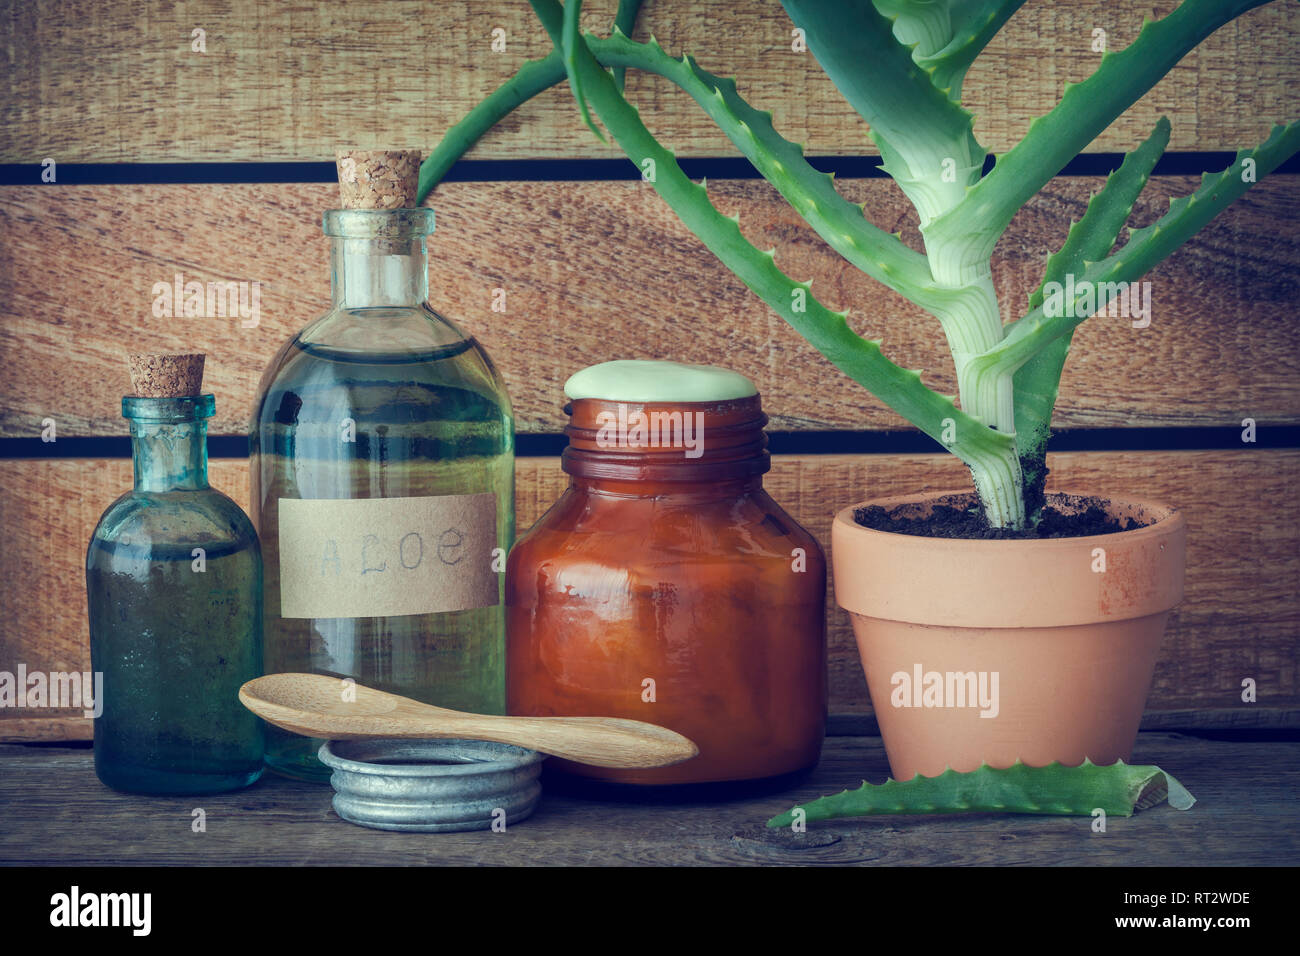 Aloe plant in flowerpot, bottle of organic aloe vera essence, cream or ointment and other products on wooden table. Stock Photo